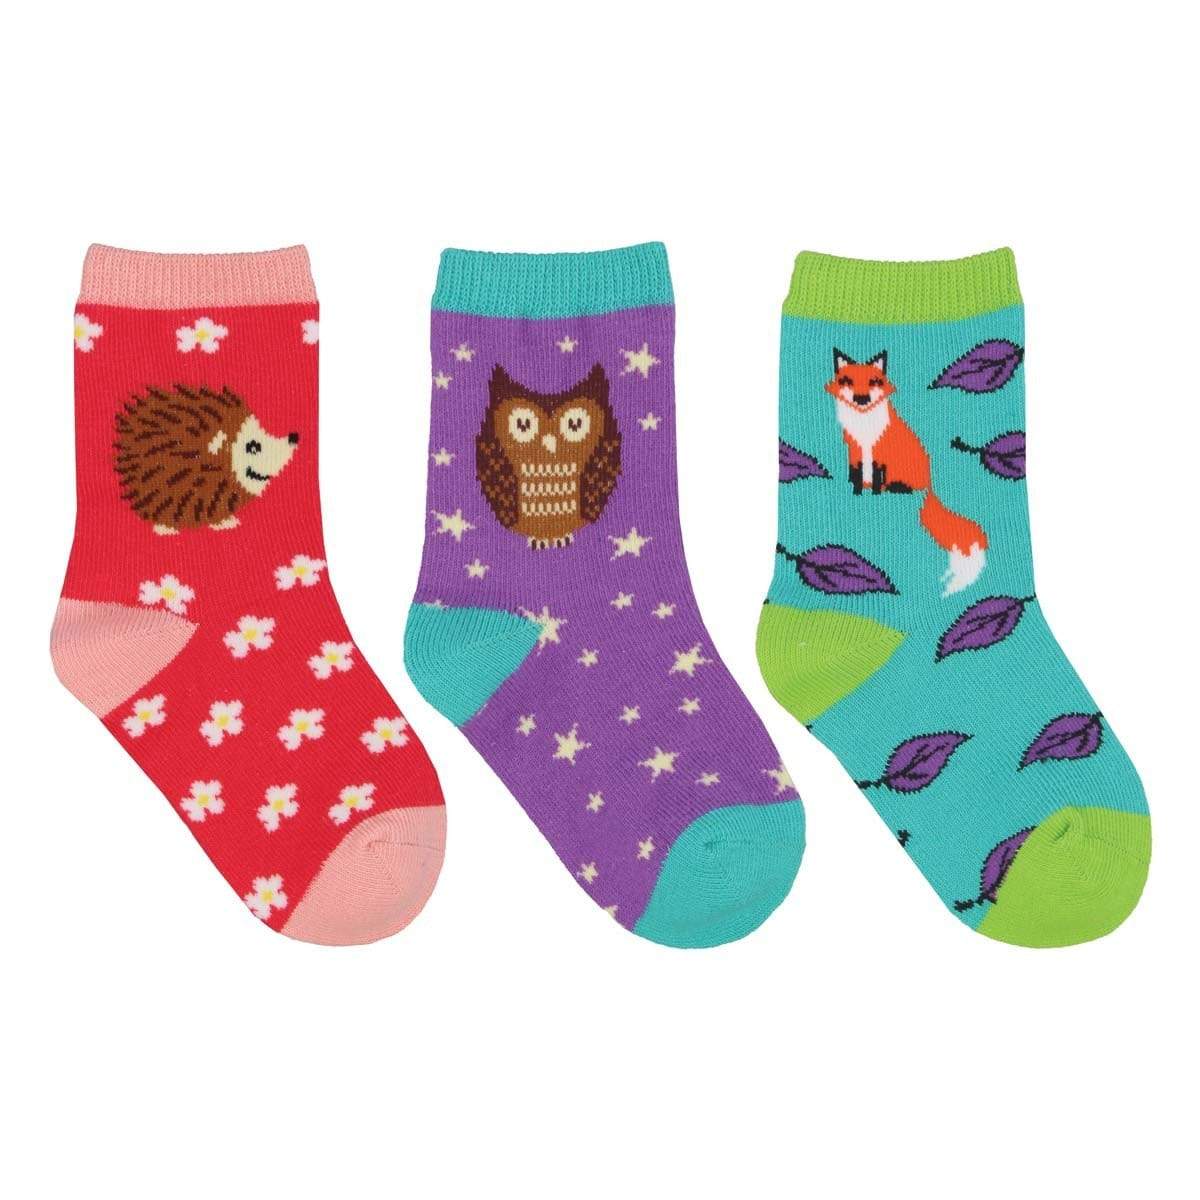 Woods You Be My Friend Crew Sock 3 Pack Multi / Toddlers 12 months - 24 months